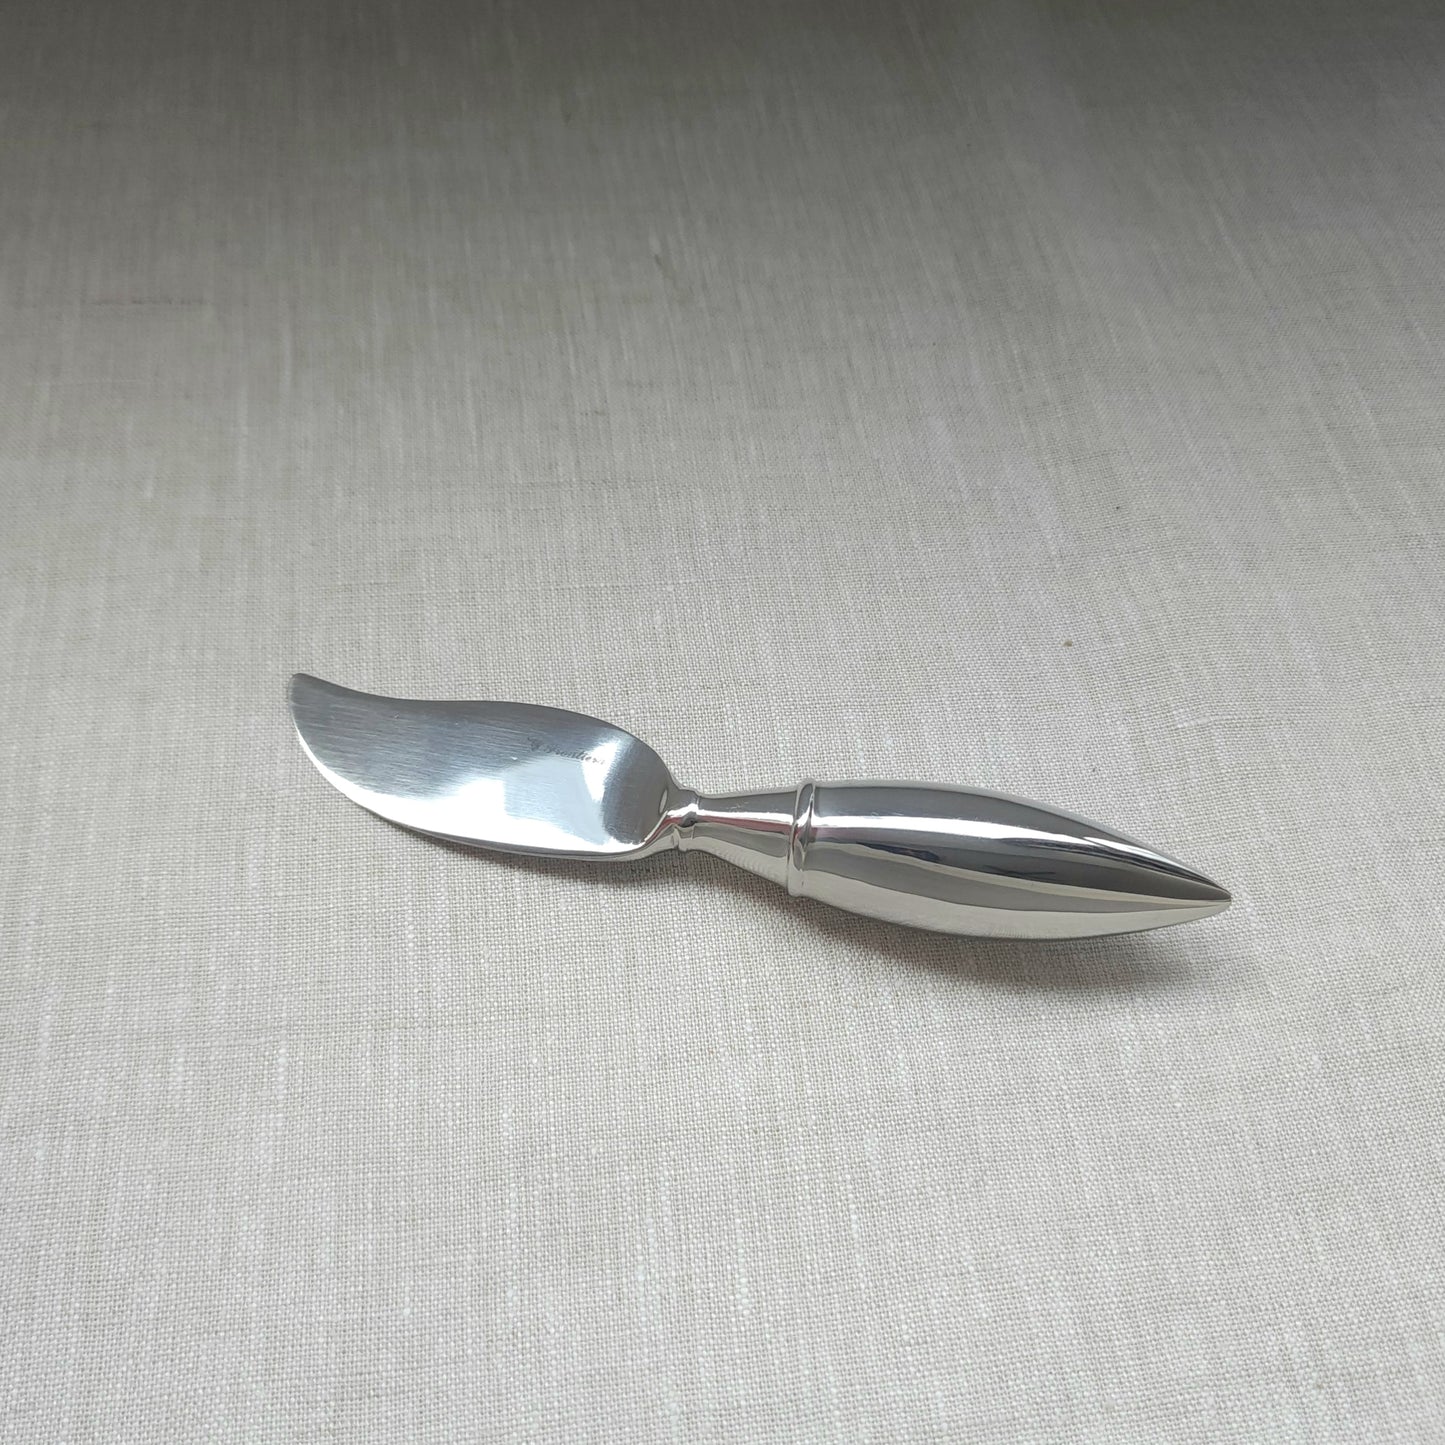 Gorgeous classic mini butter knife 154mm + Free Name Engraving Service